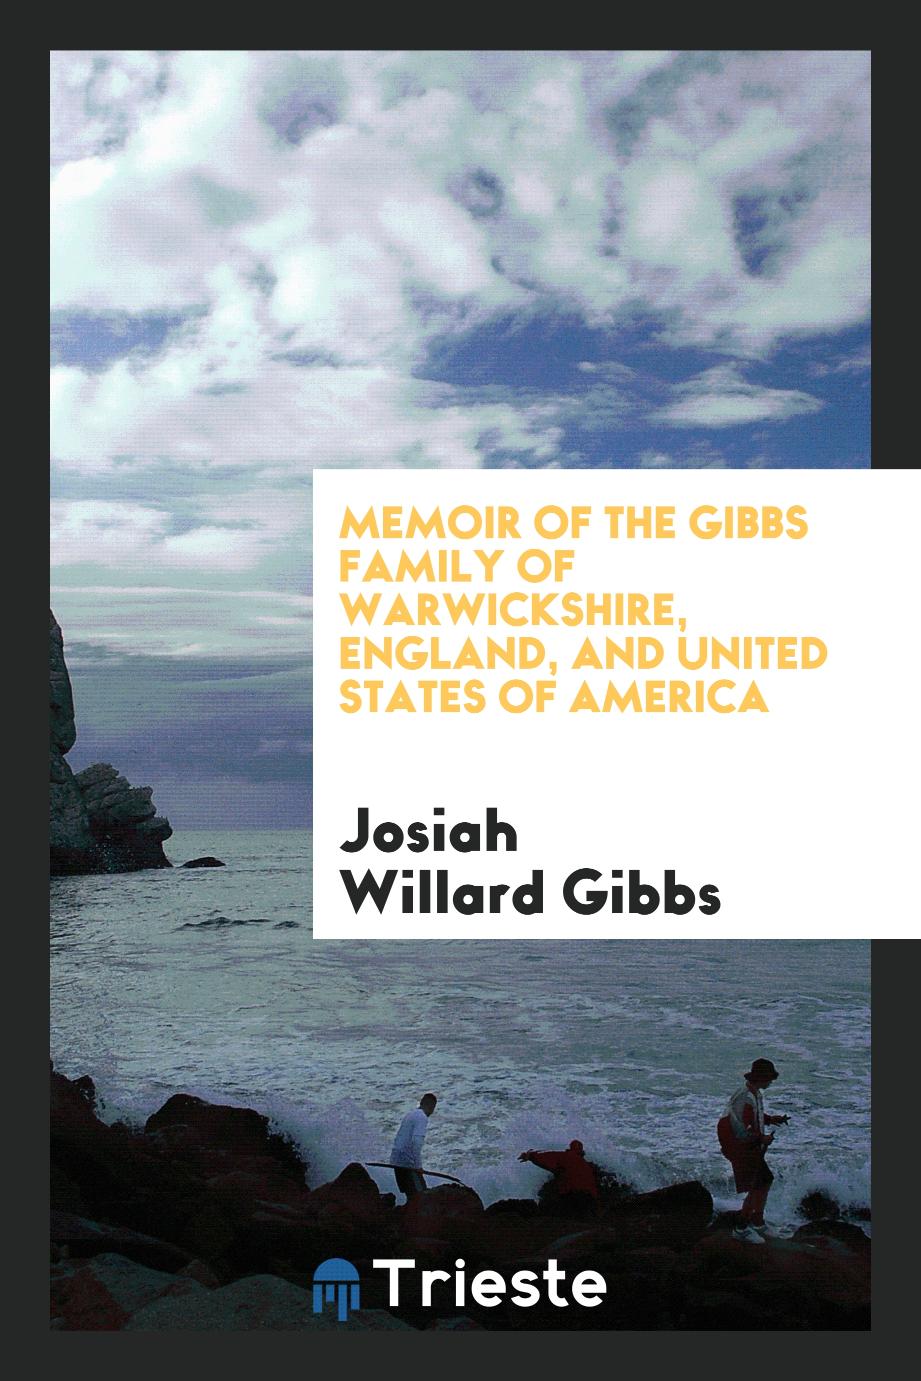 Memoir of the Gibbs family of Warwickshire, England, and United States of America